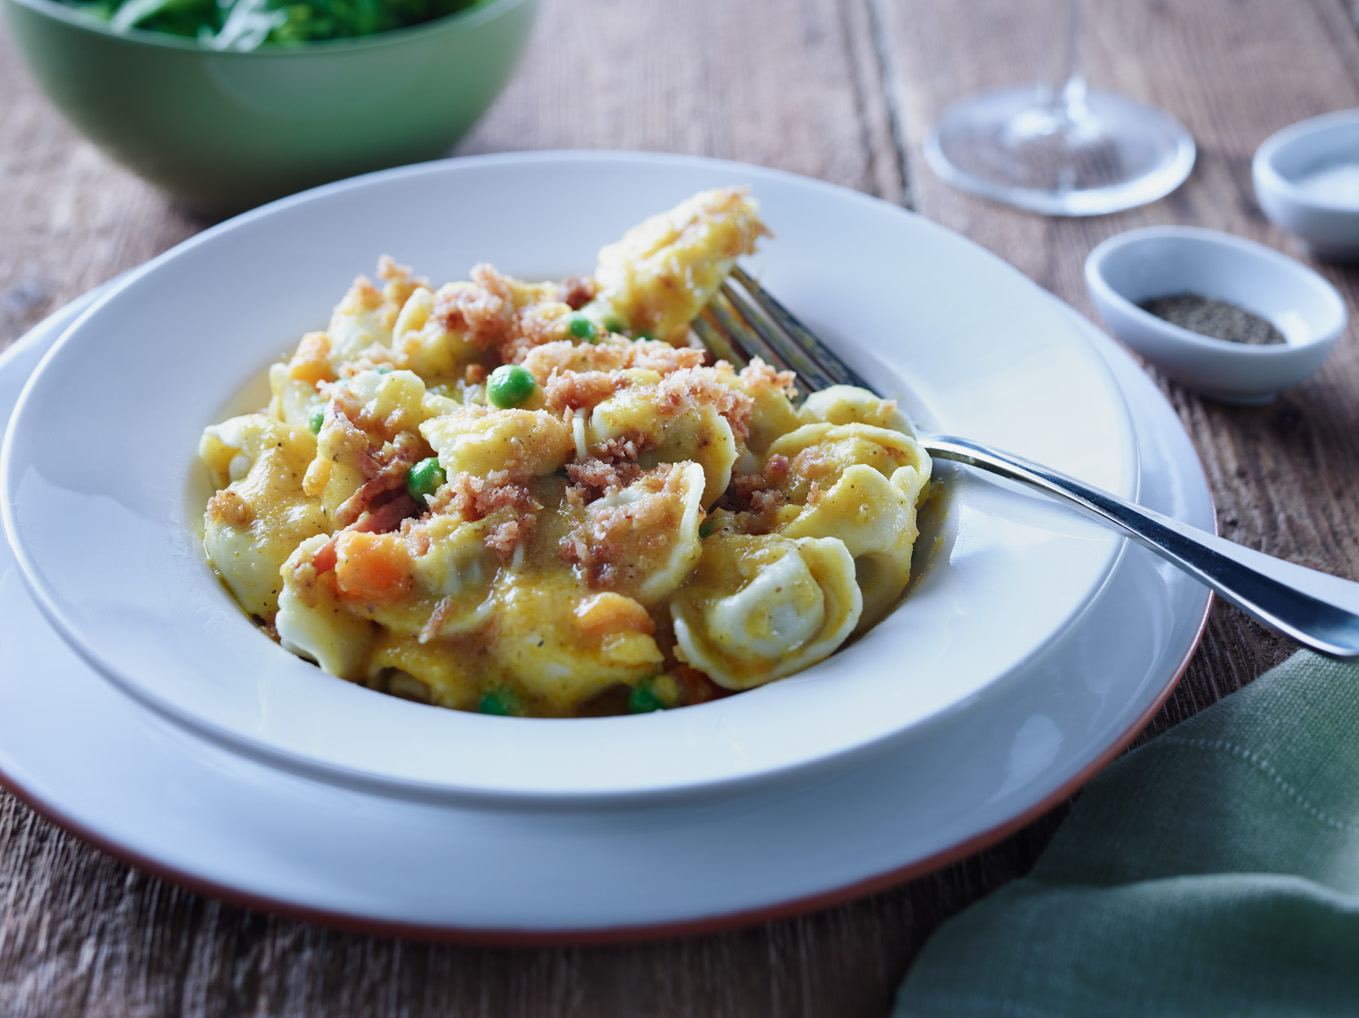 Pumpkin, Pea and Bacon Tortellini with Toasted Crumbs